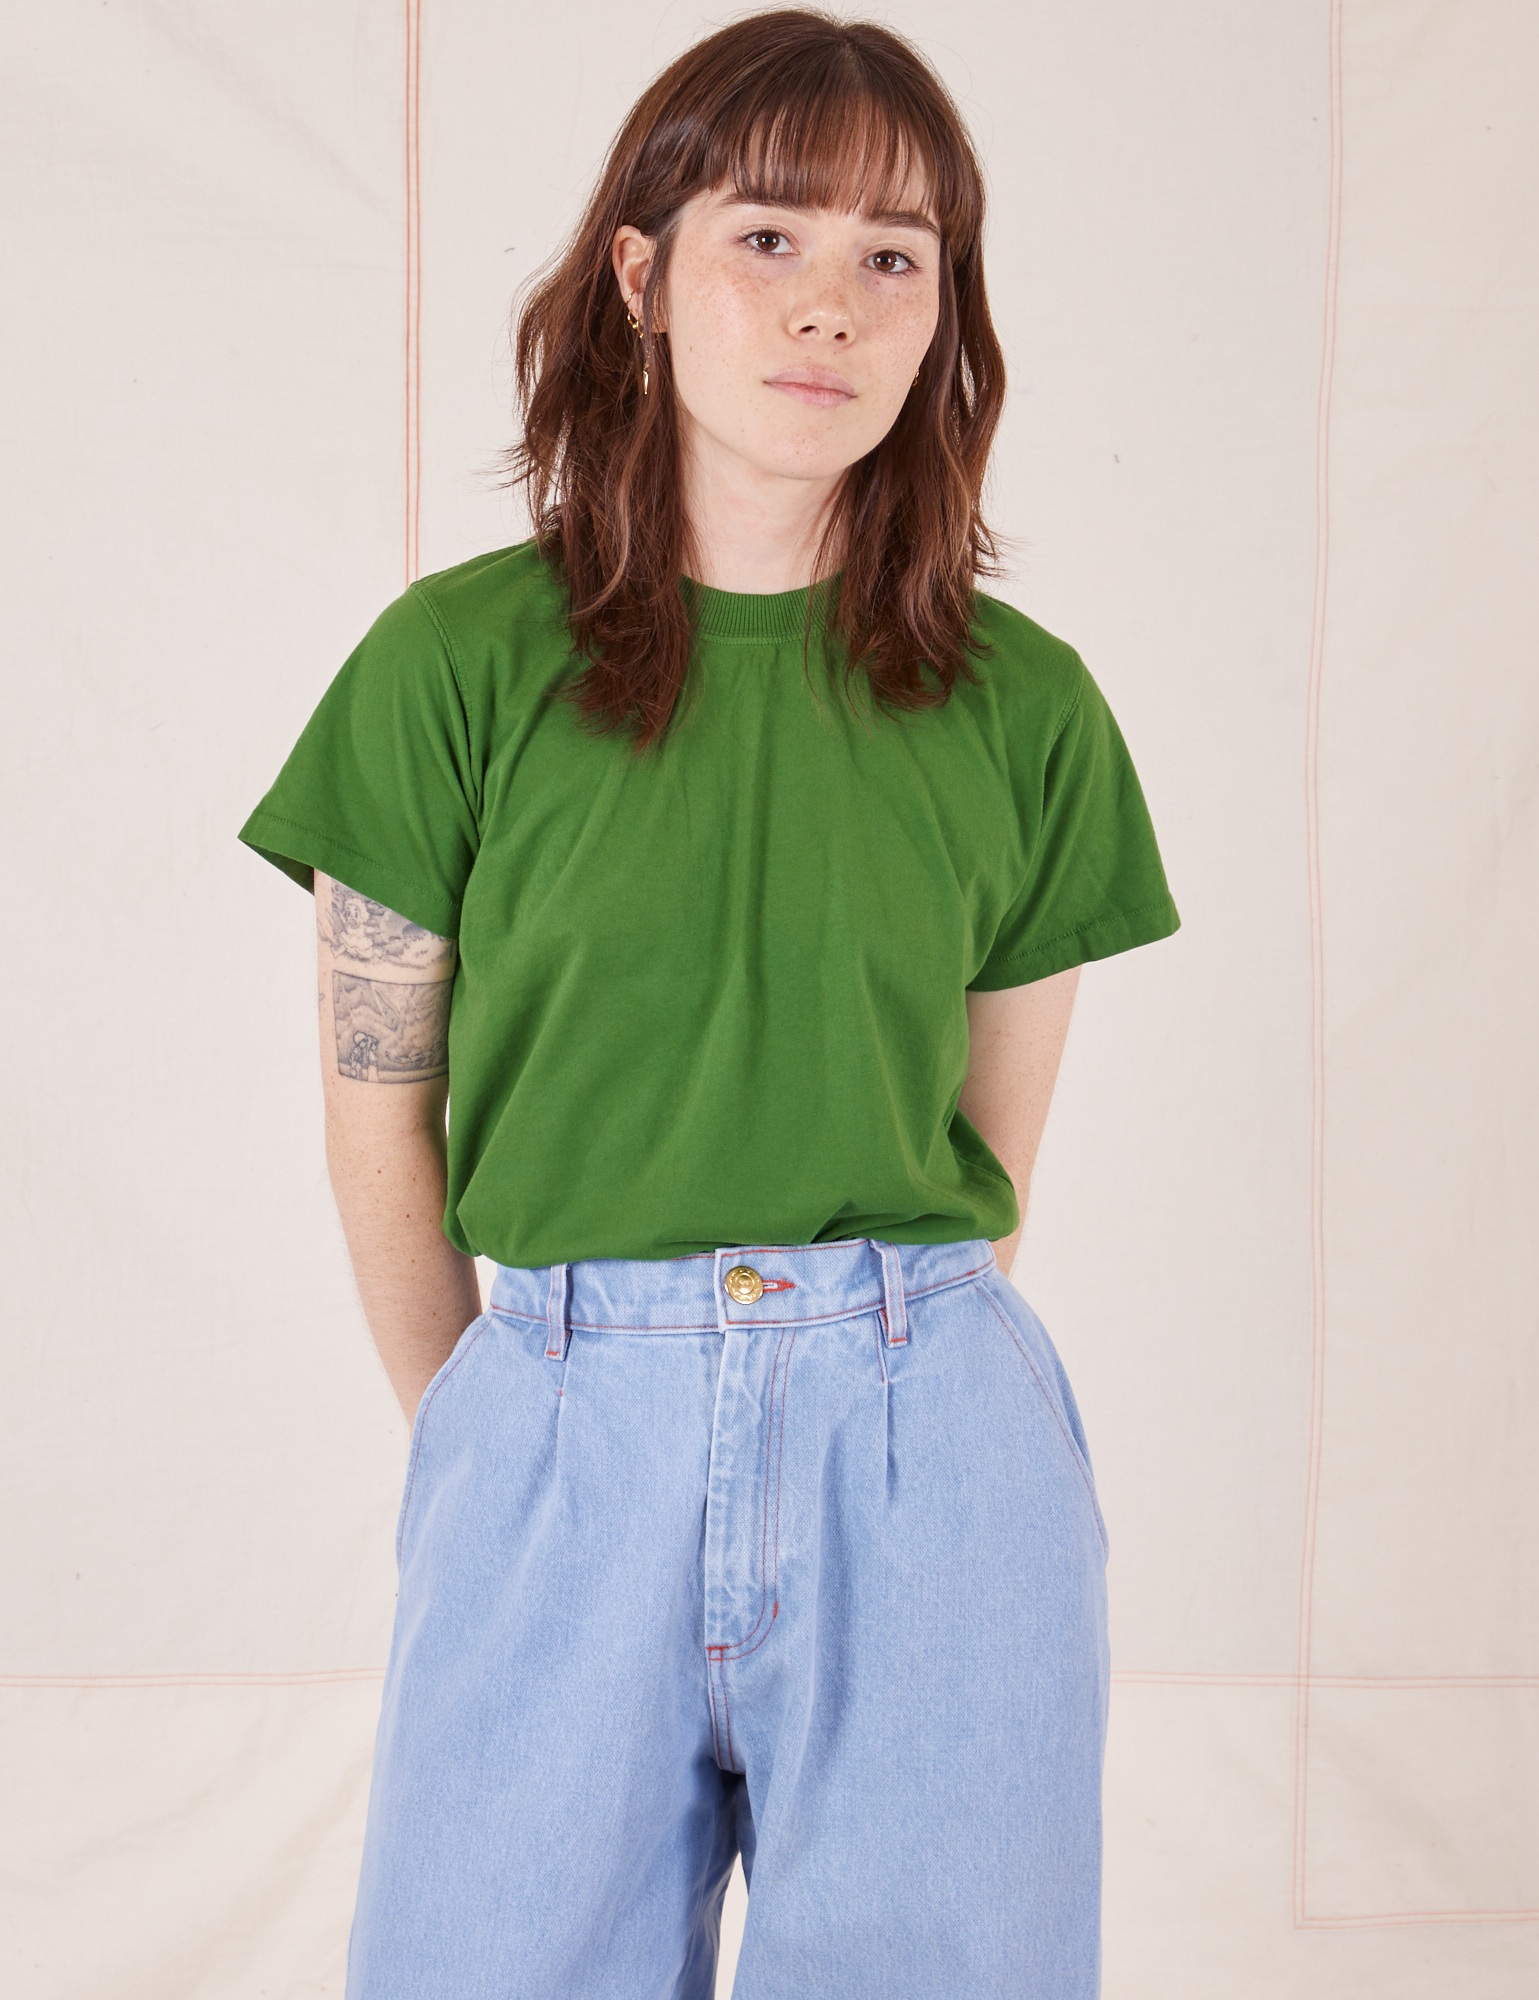 Hana is wearing Organic Vintage Tee in Lawn Green tucked into light wash Trouser Jeans